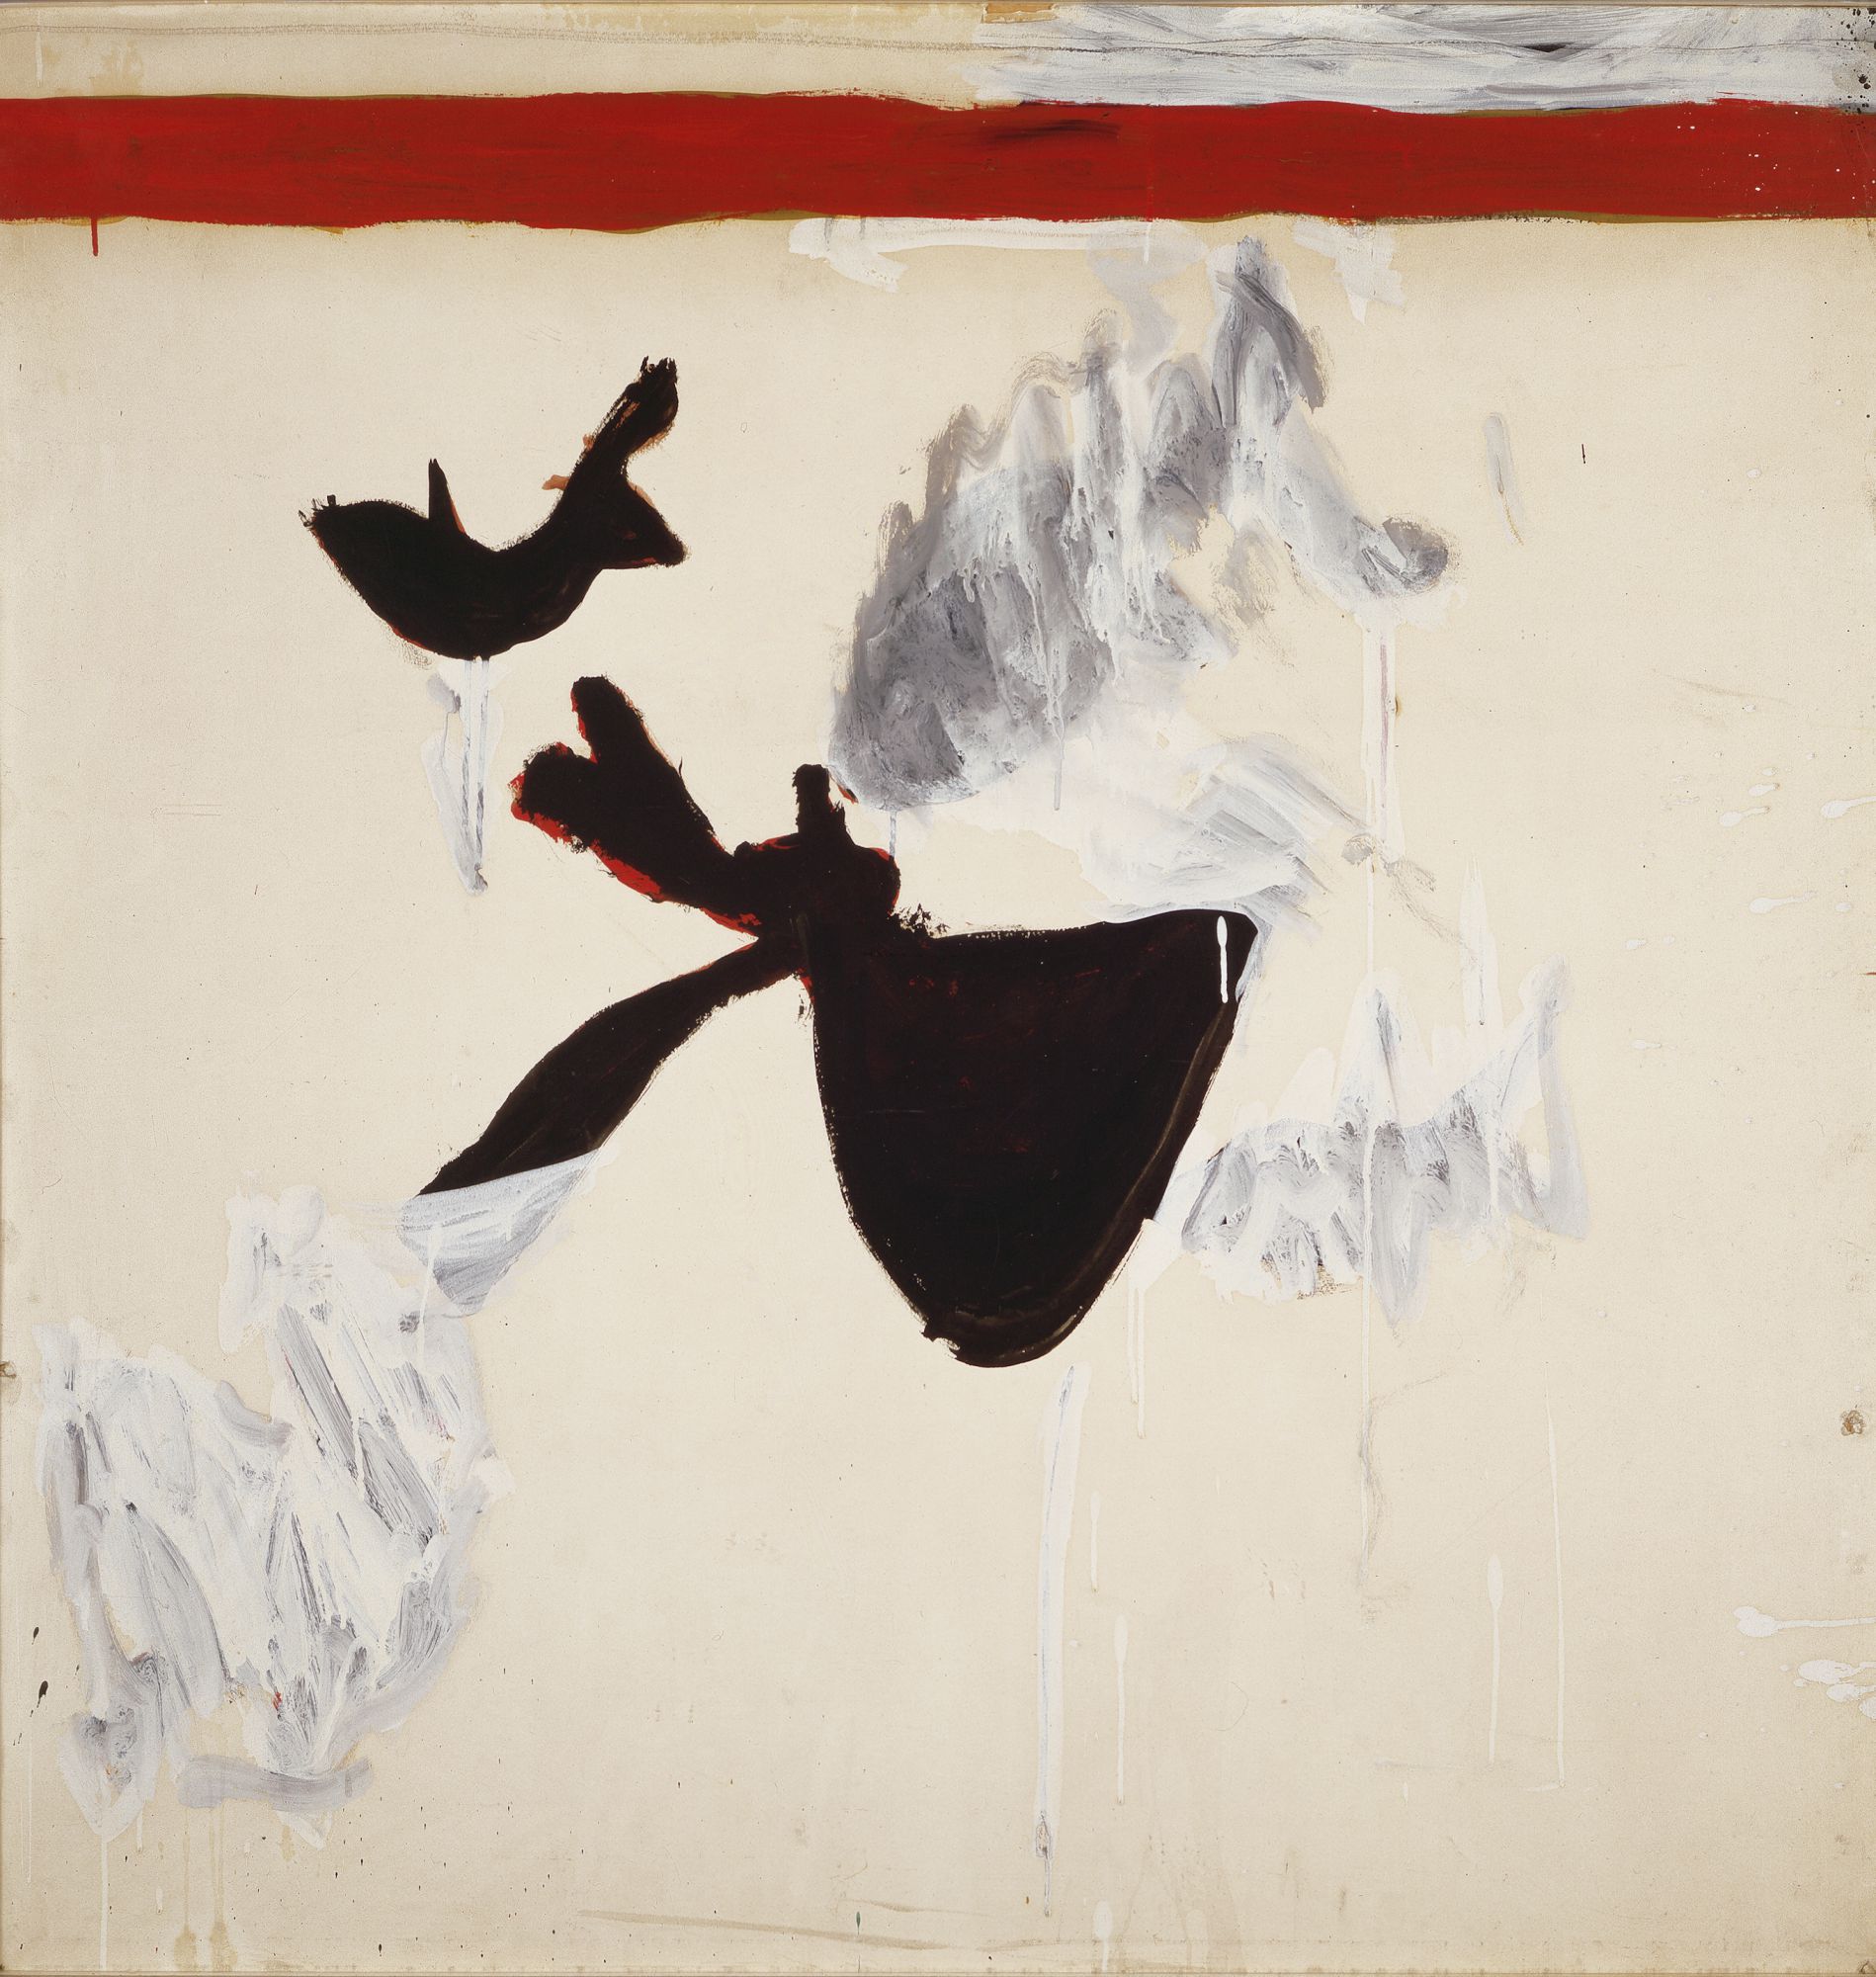 Fishes with Red Stripe, 1954, oil on paper mounted on board, 42 1/2 ✕ 41 1/4 in. (108 ✕ 104.8 cm)